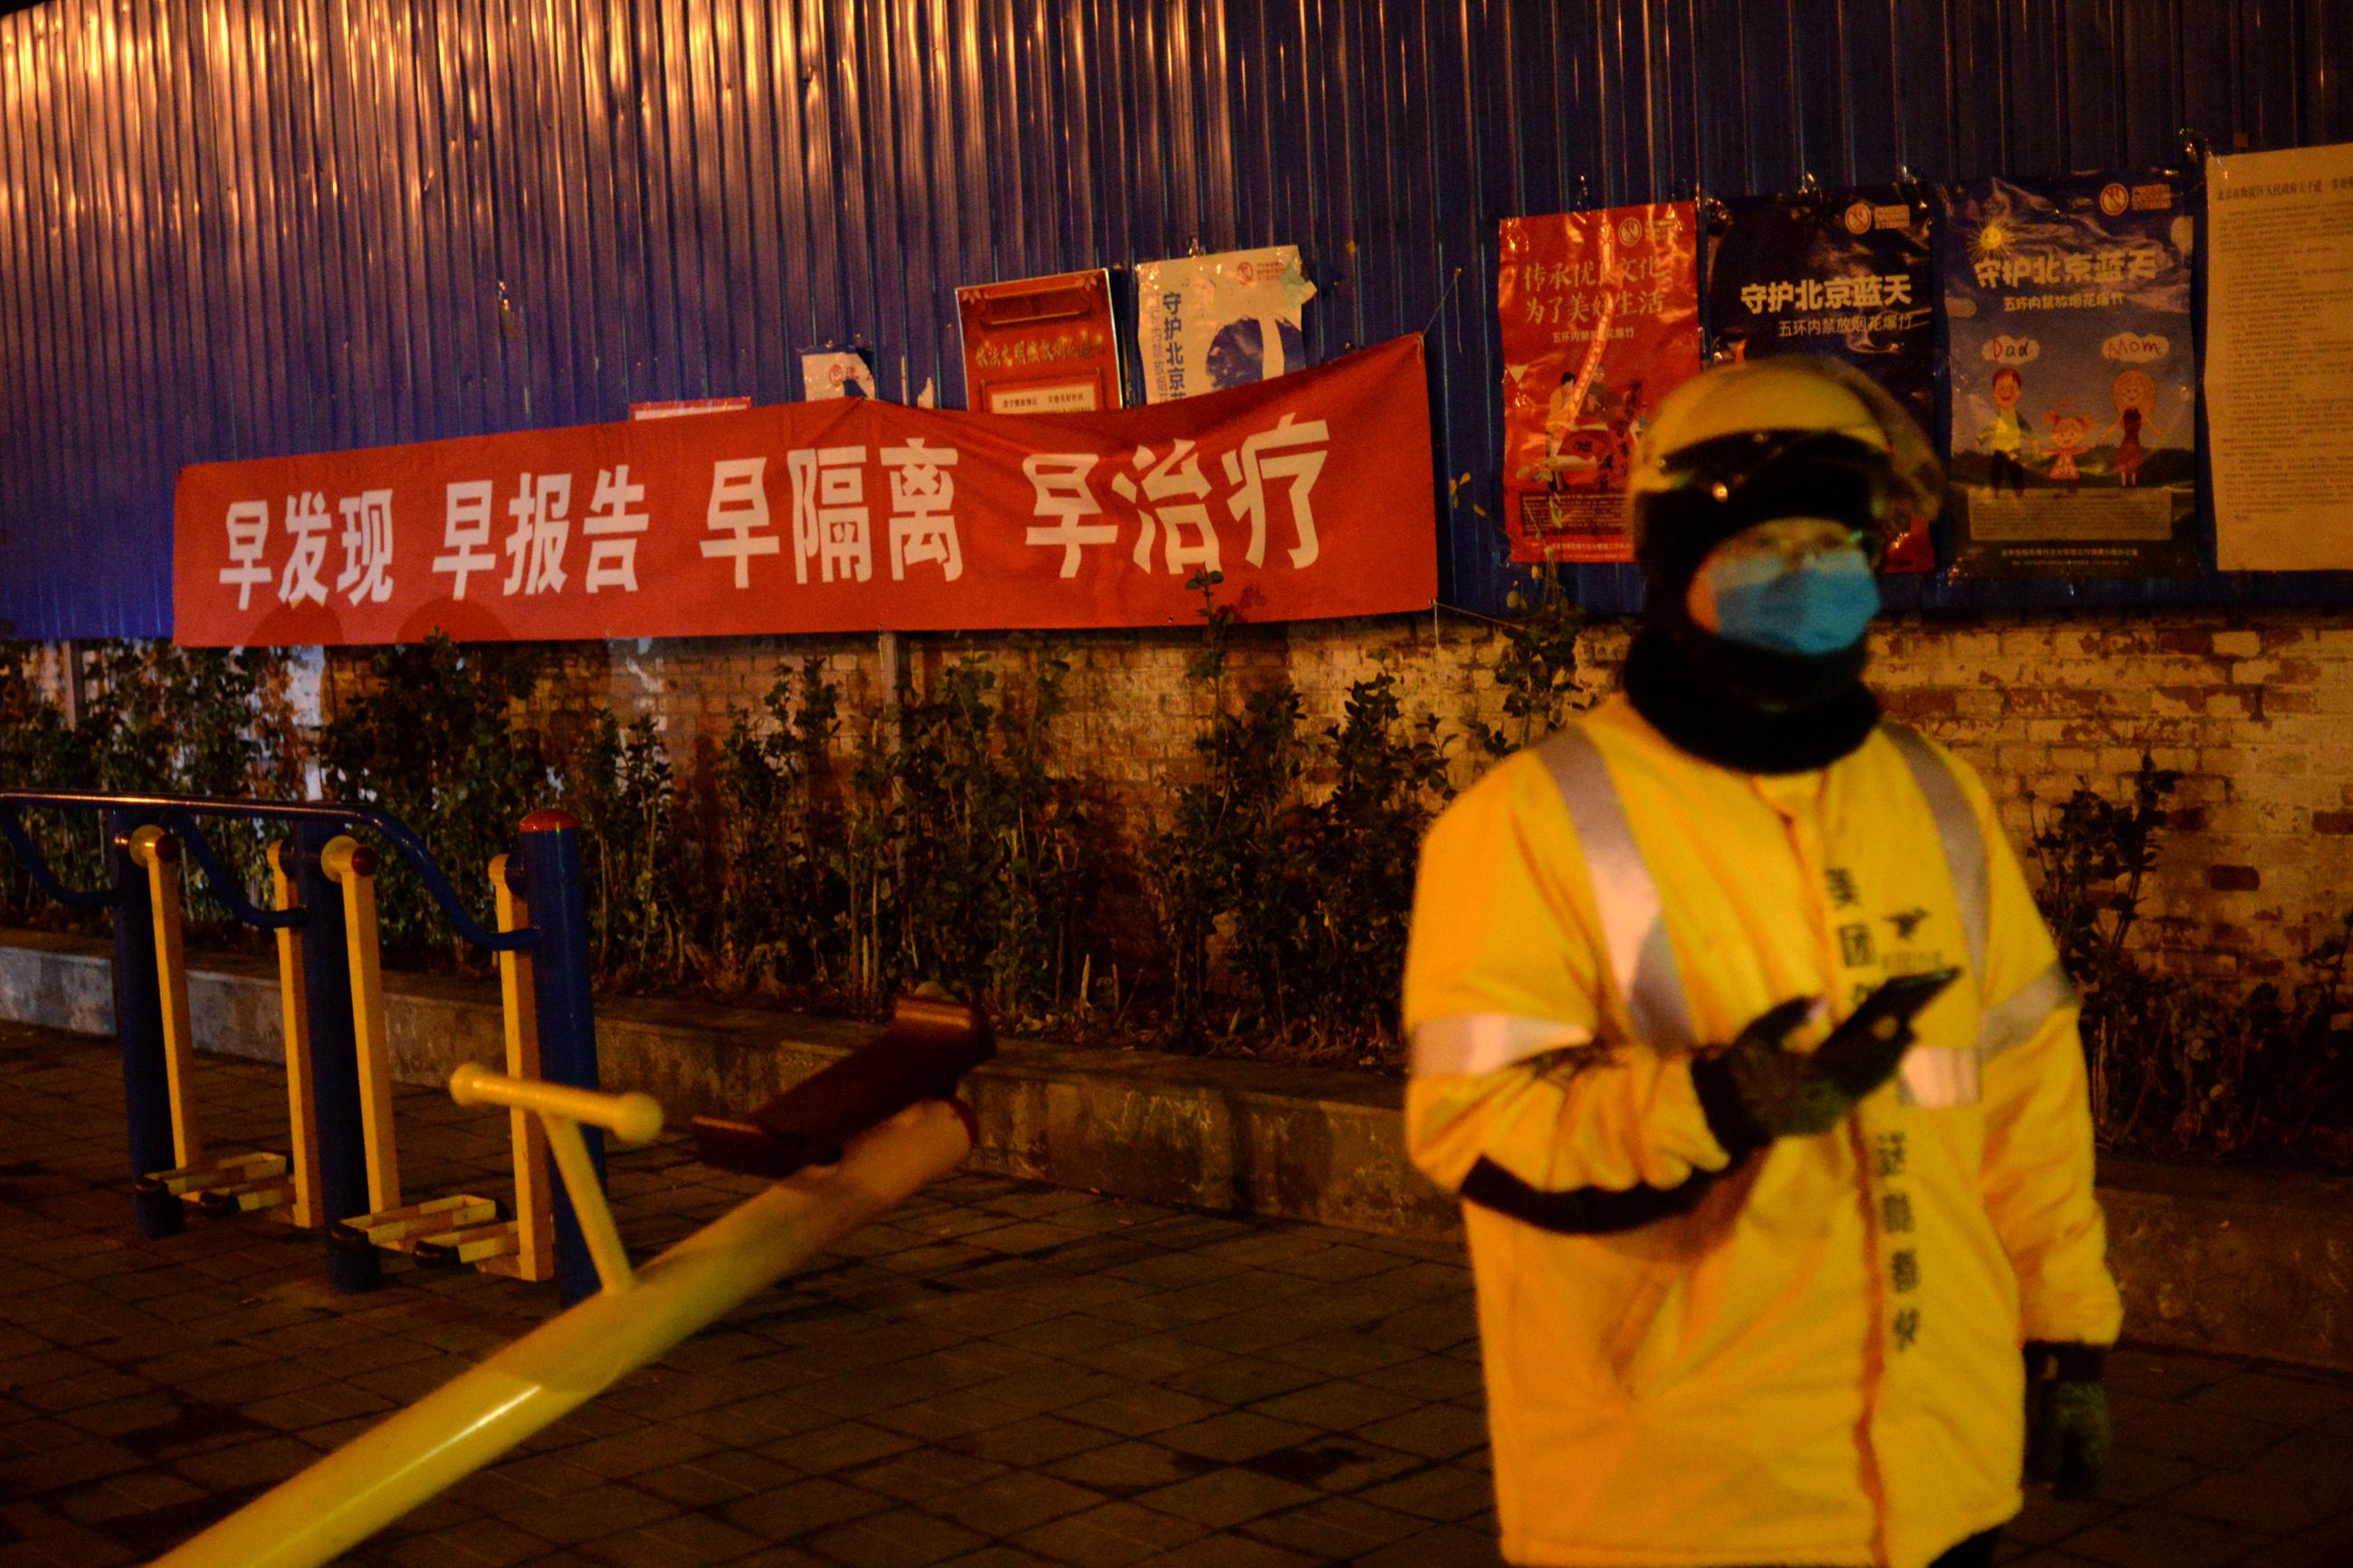 A deliveryman waits next to a propaganda banner, following an outbreak of COVID-19, Beijing, China February 11, 2020. The banner reads, "Detect early, report early, isolate early, treat early".